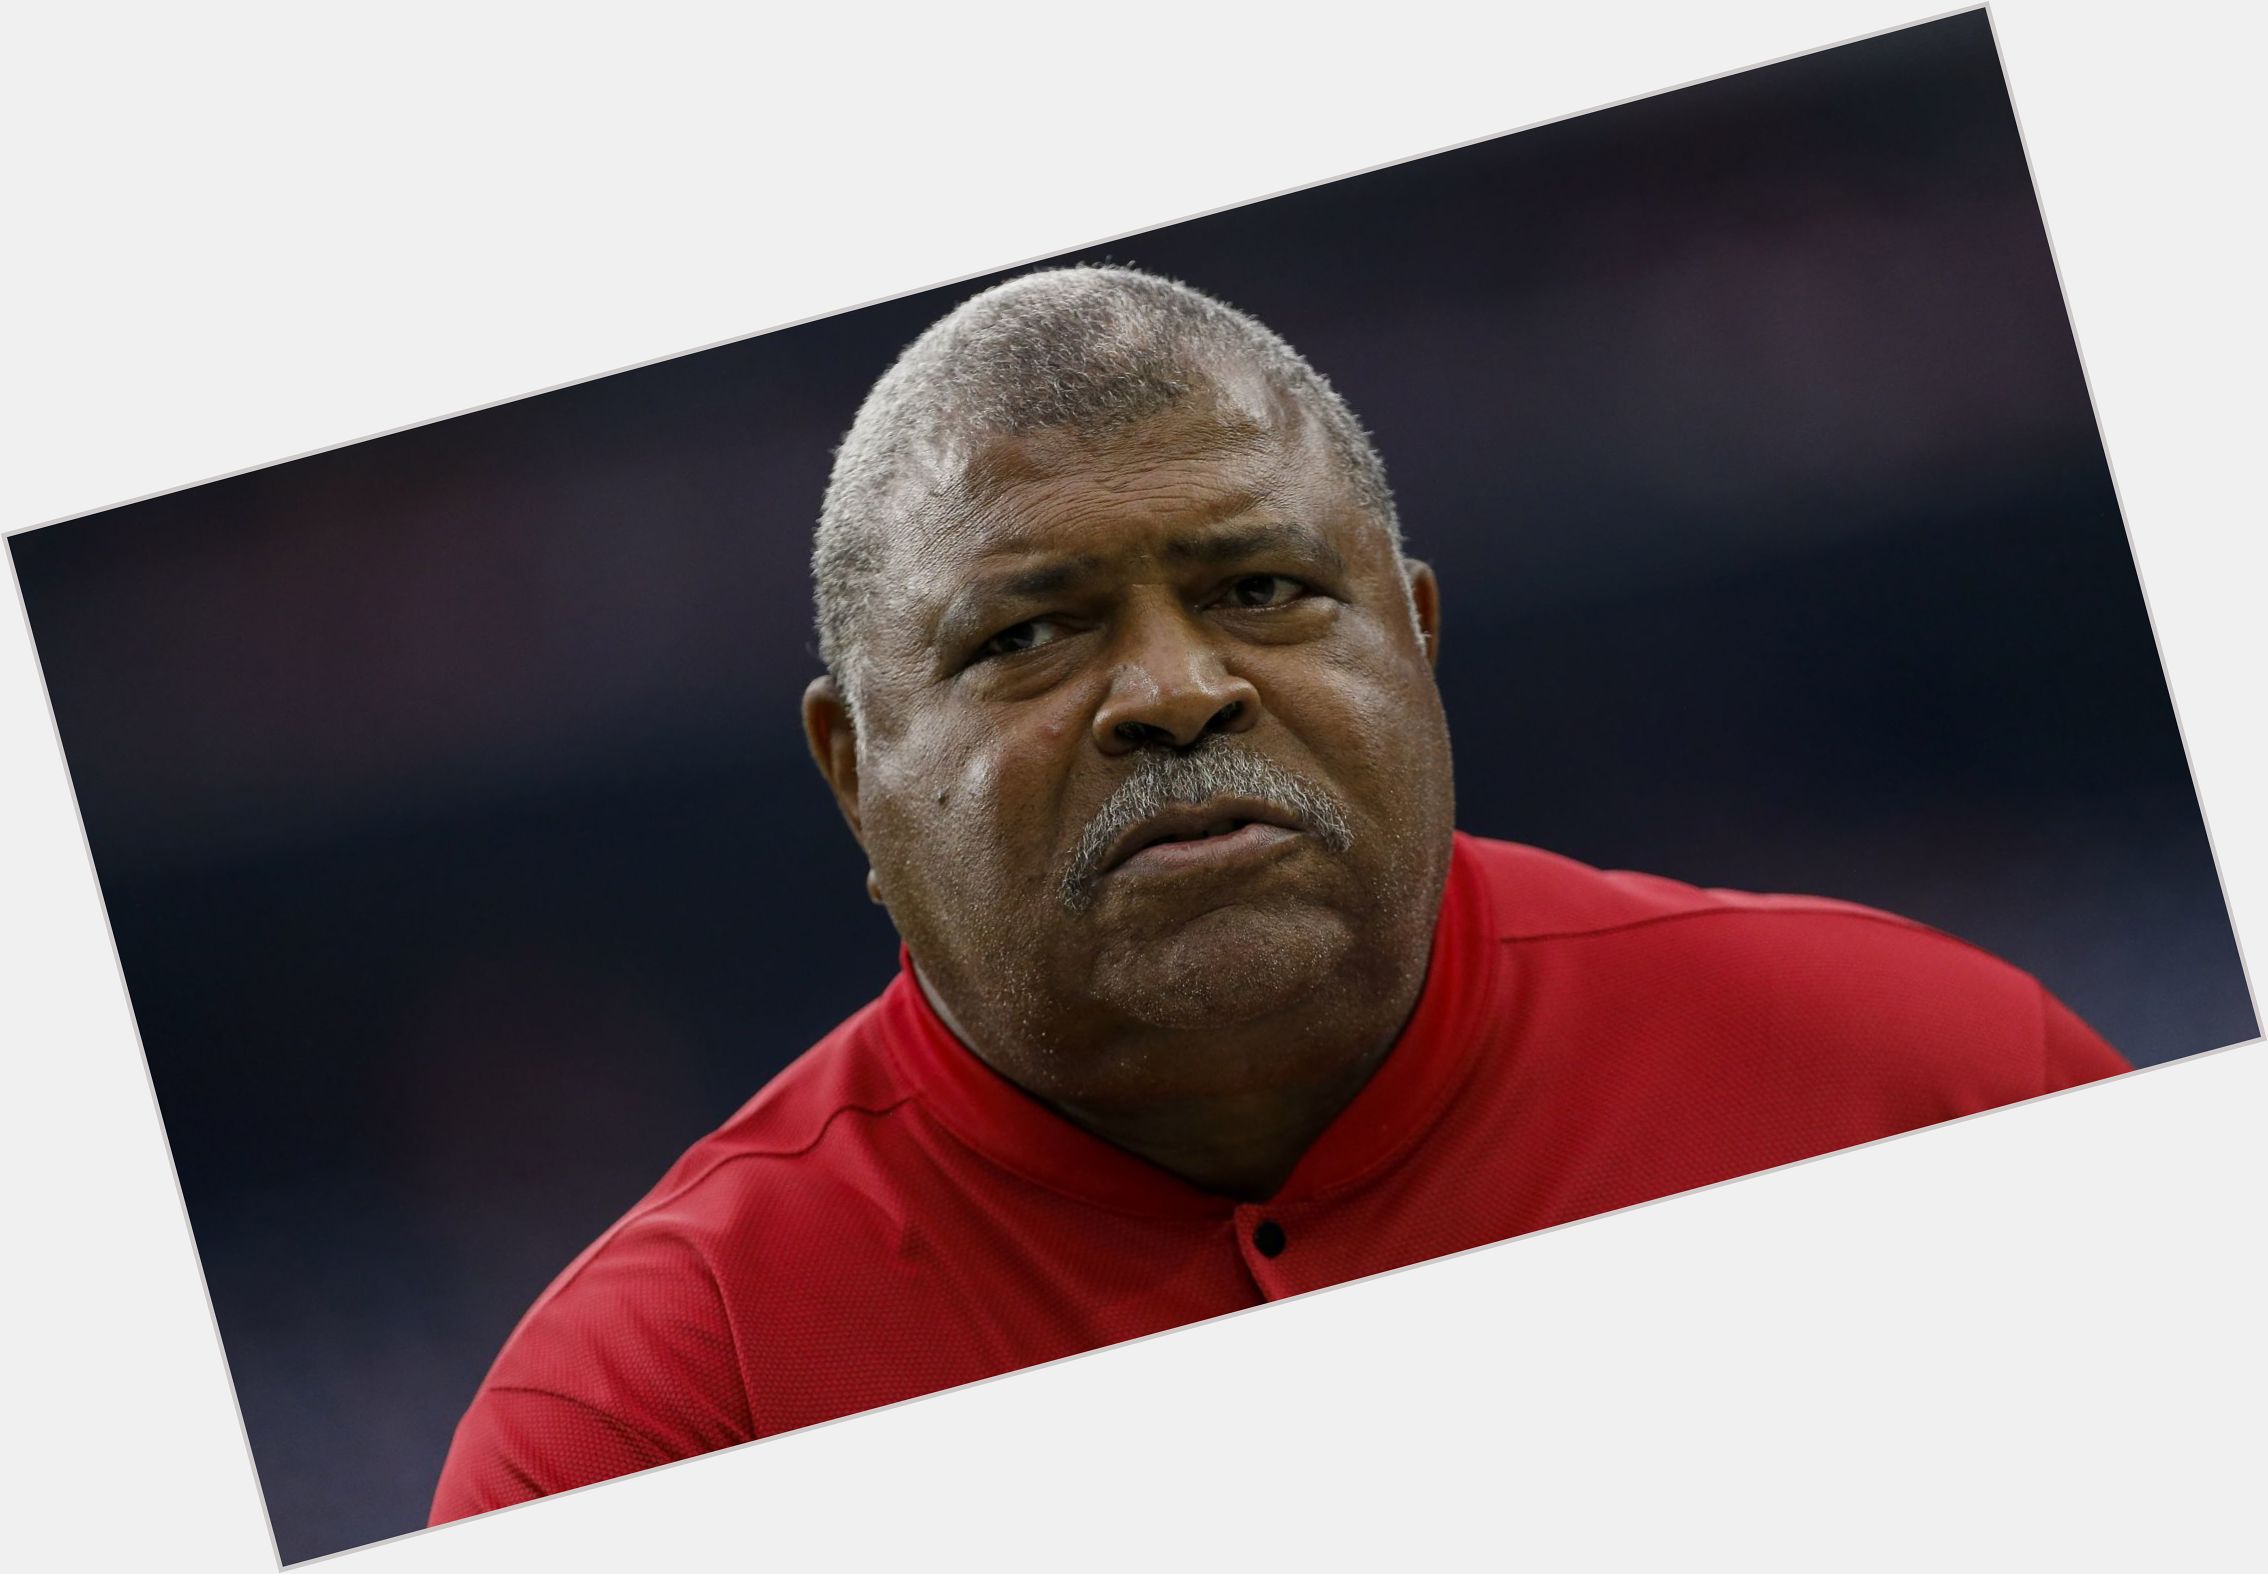 <a href="/hot-men/romeo-crennel/where-dating-news-photos">Romeo Crennel</a> Large body,  salt and pepper hair & hairstyles